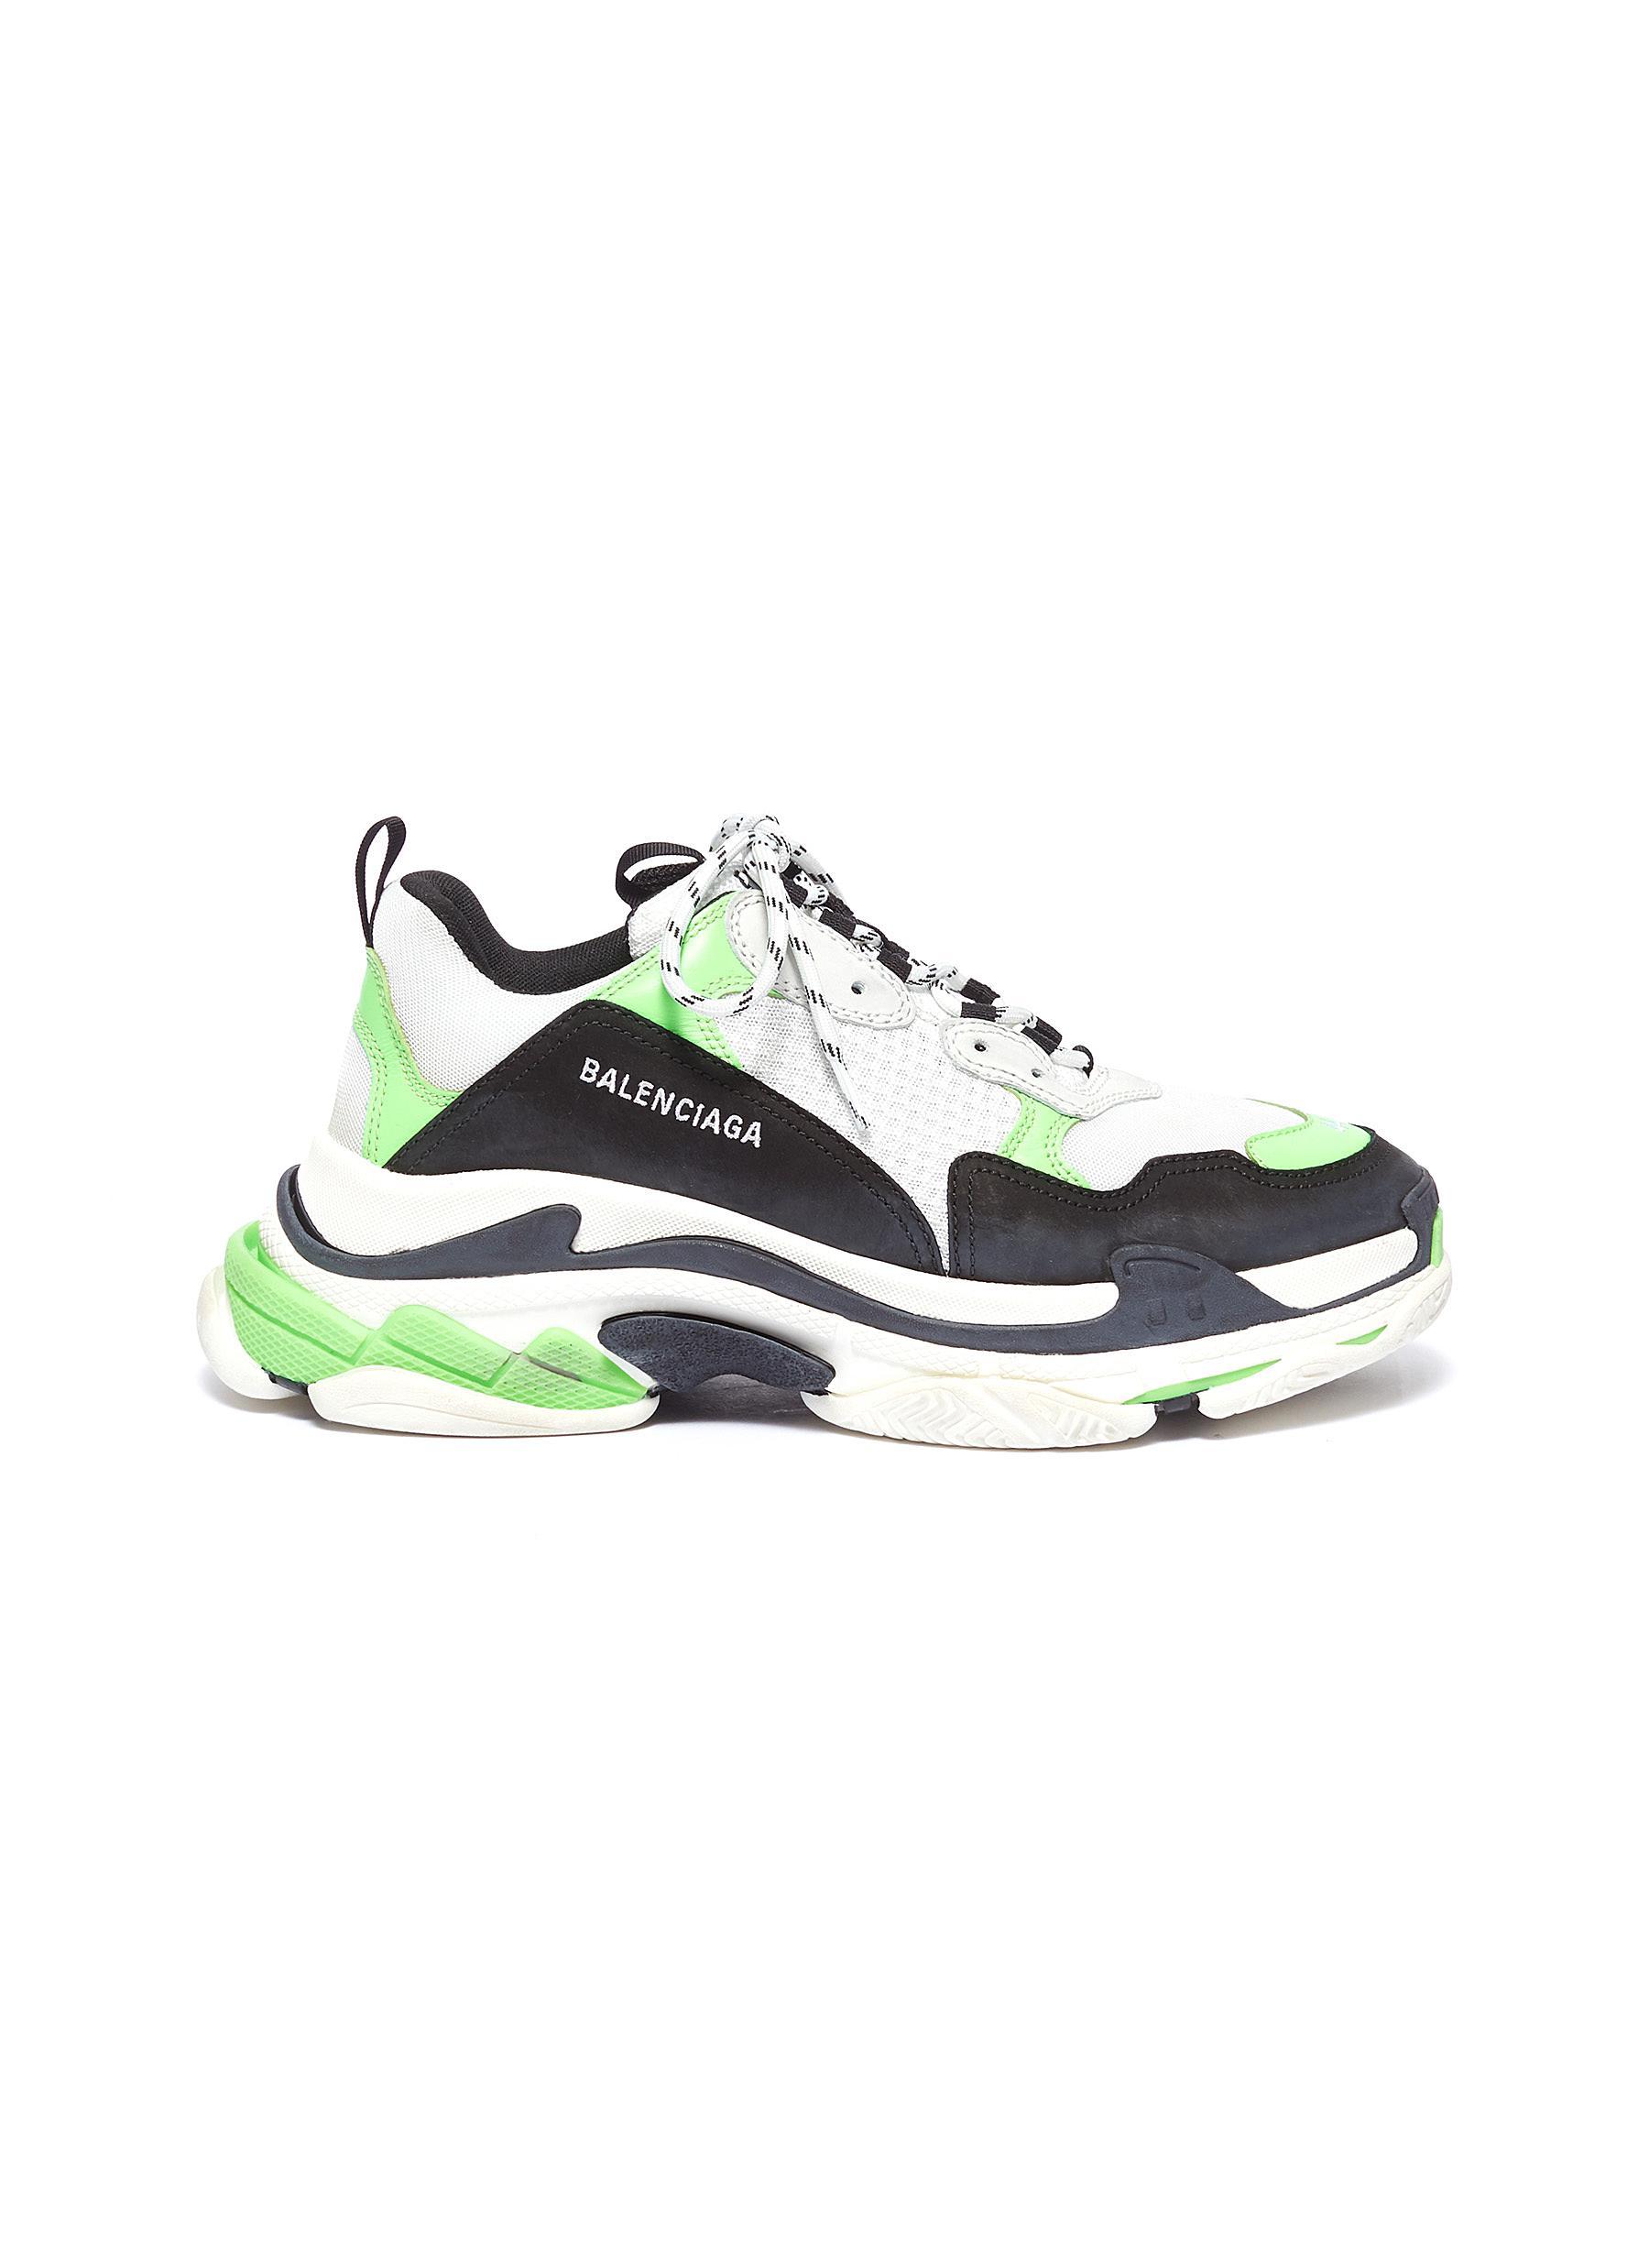 Balenciaga Triple S Mesh, Nubuck And Leather Sneakers in White / Neon Green  / Black (Green) for Men | Lyst